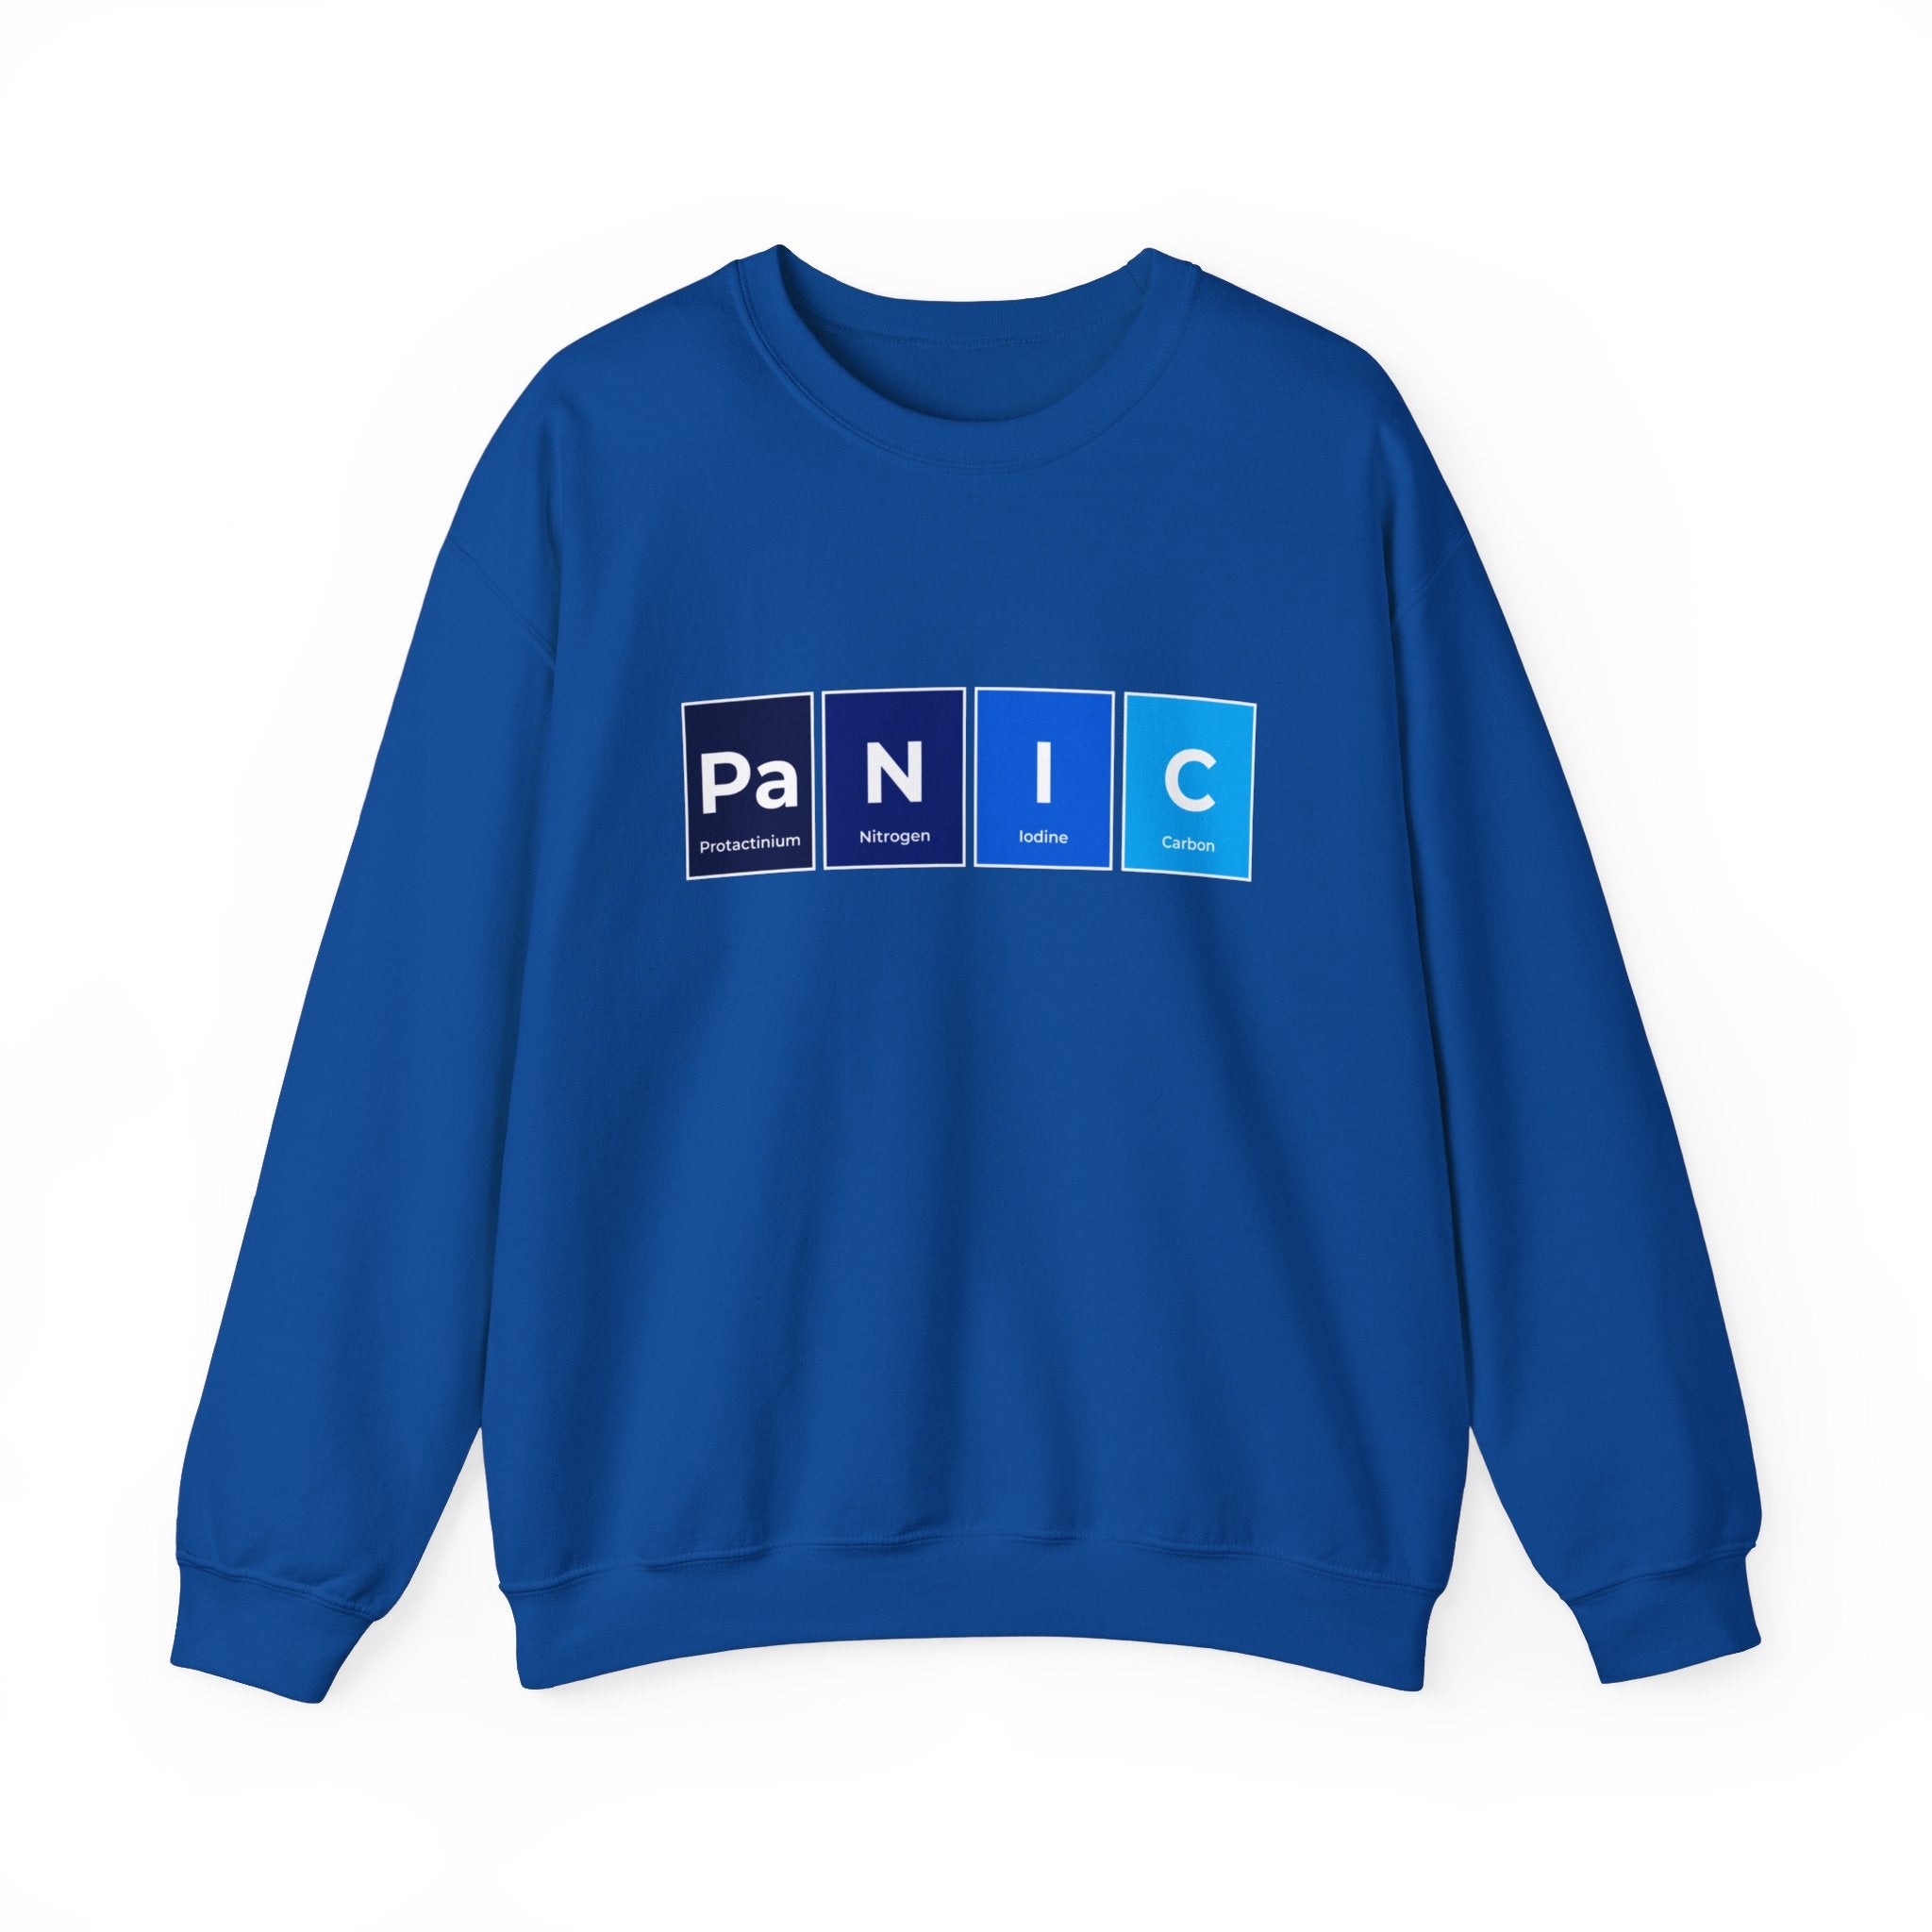 A cozy blue Pa-N-I-C - Sweatshirt perfect for the colder months, featuring a humorous design with periodic table elements: Phosphorus (P), Nitrogen (N), Iodine (I), and Carbon (C).